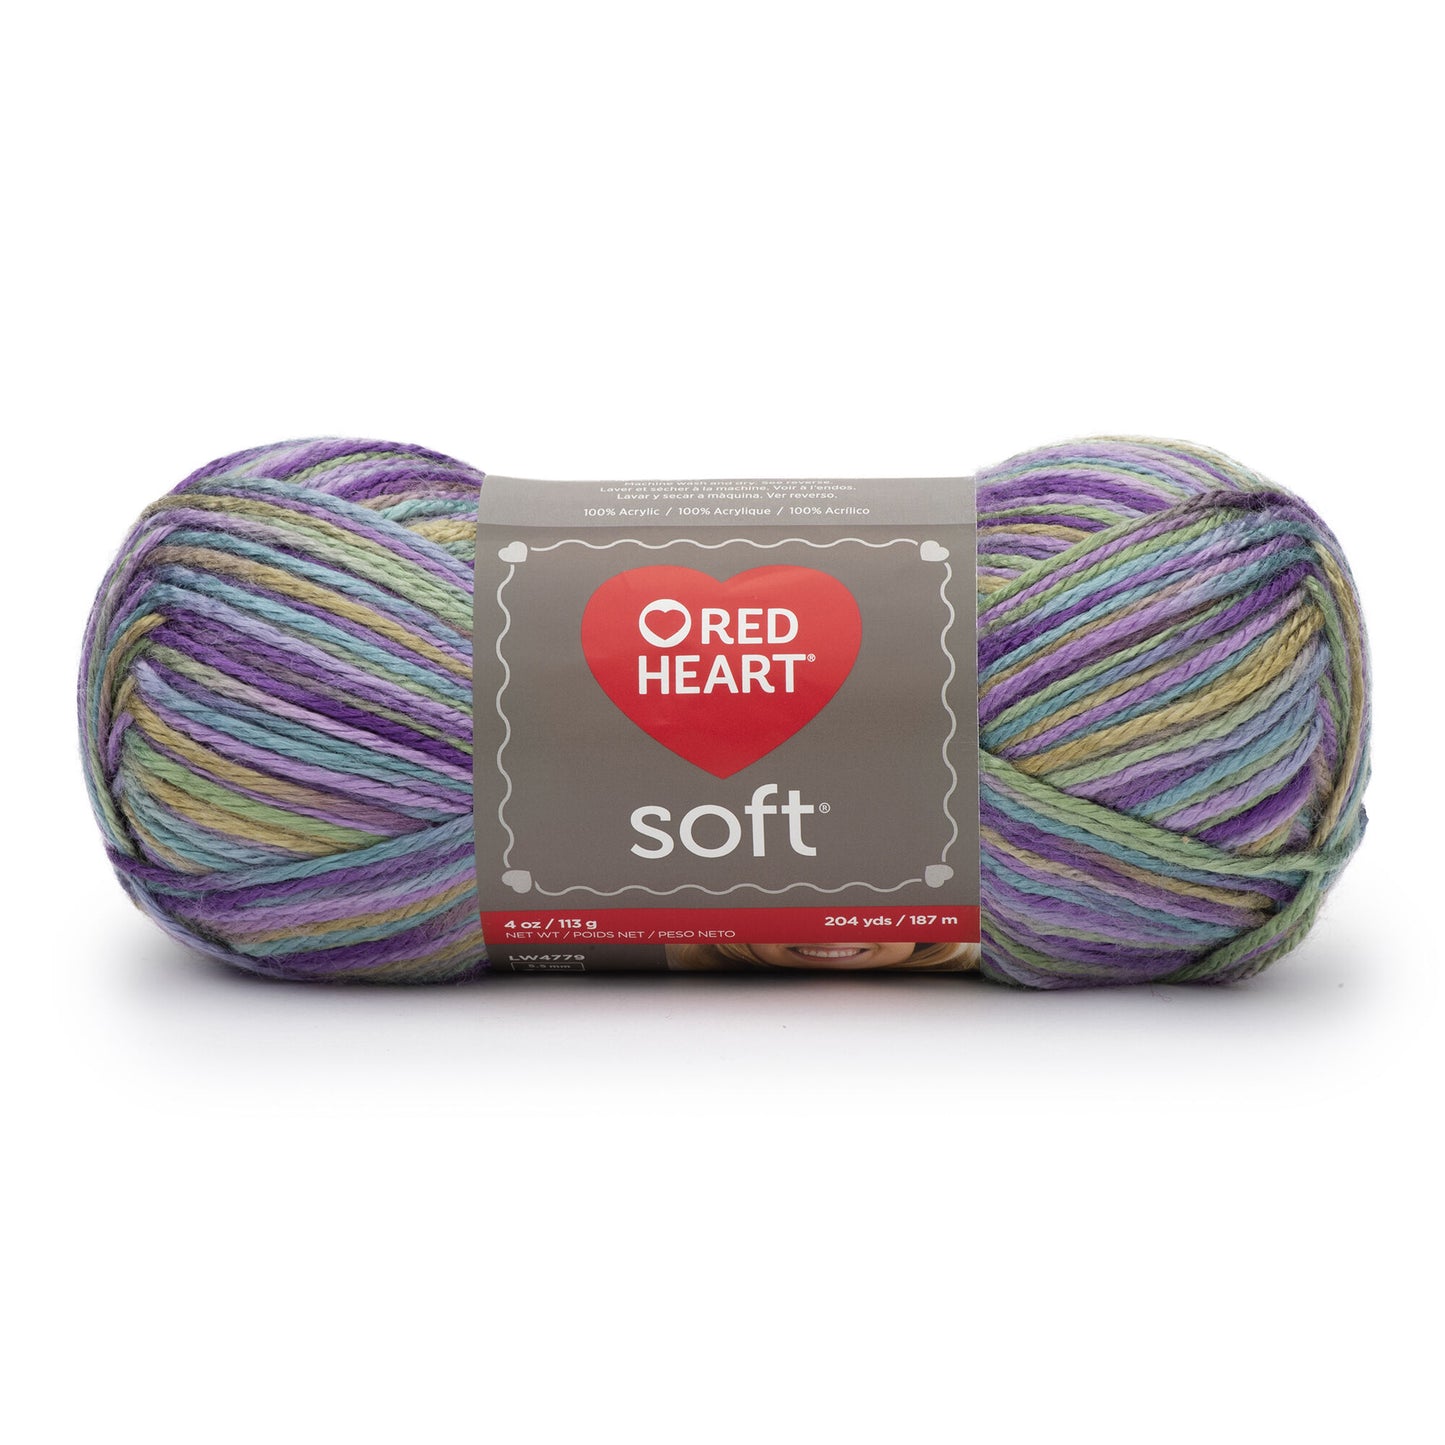 SOFT | Red Heart